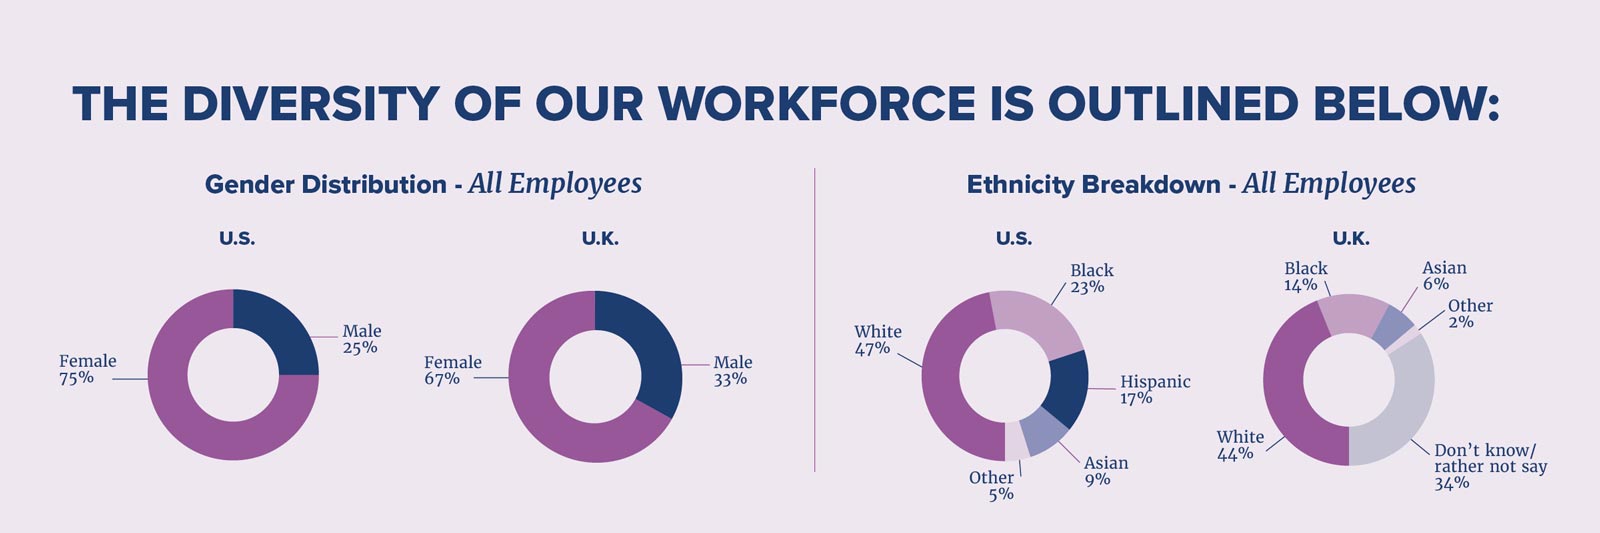 The diversity of our workforce